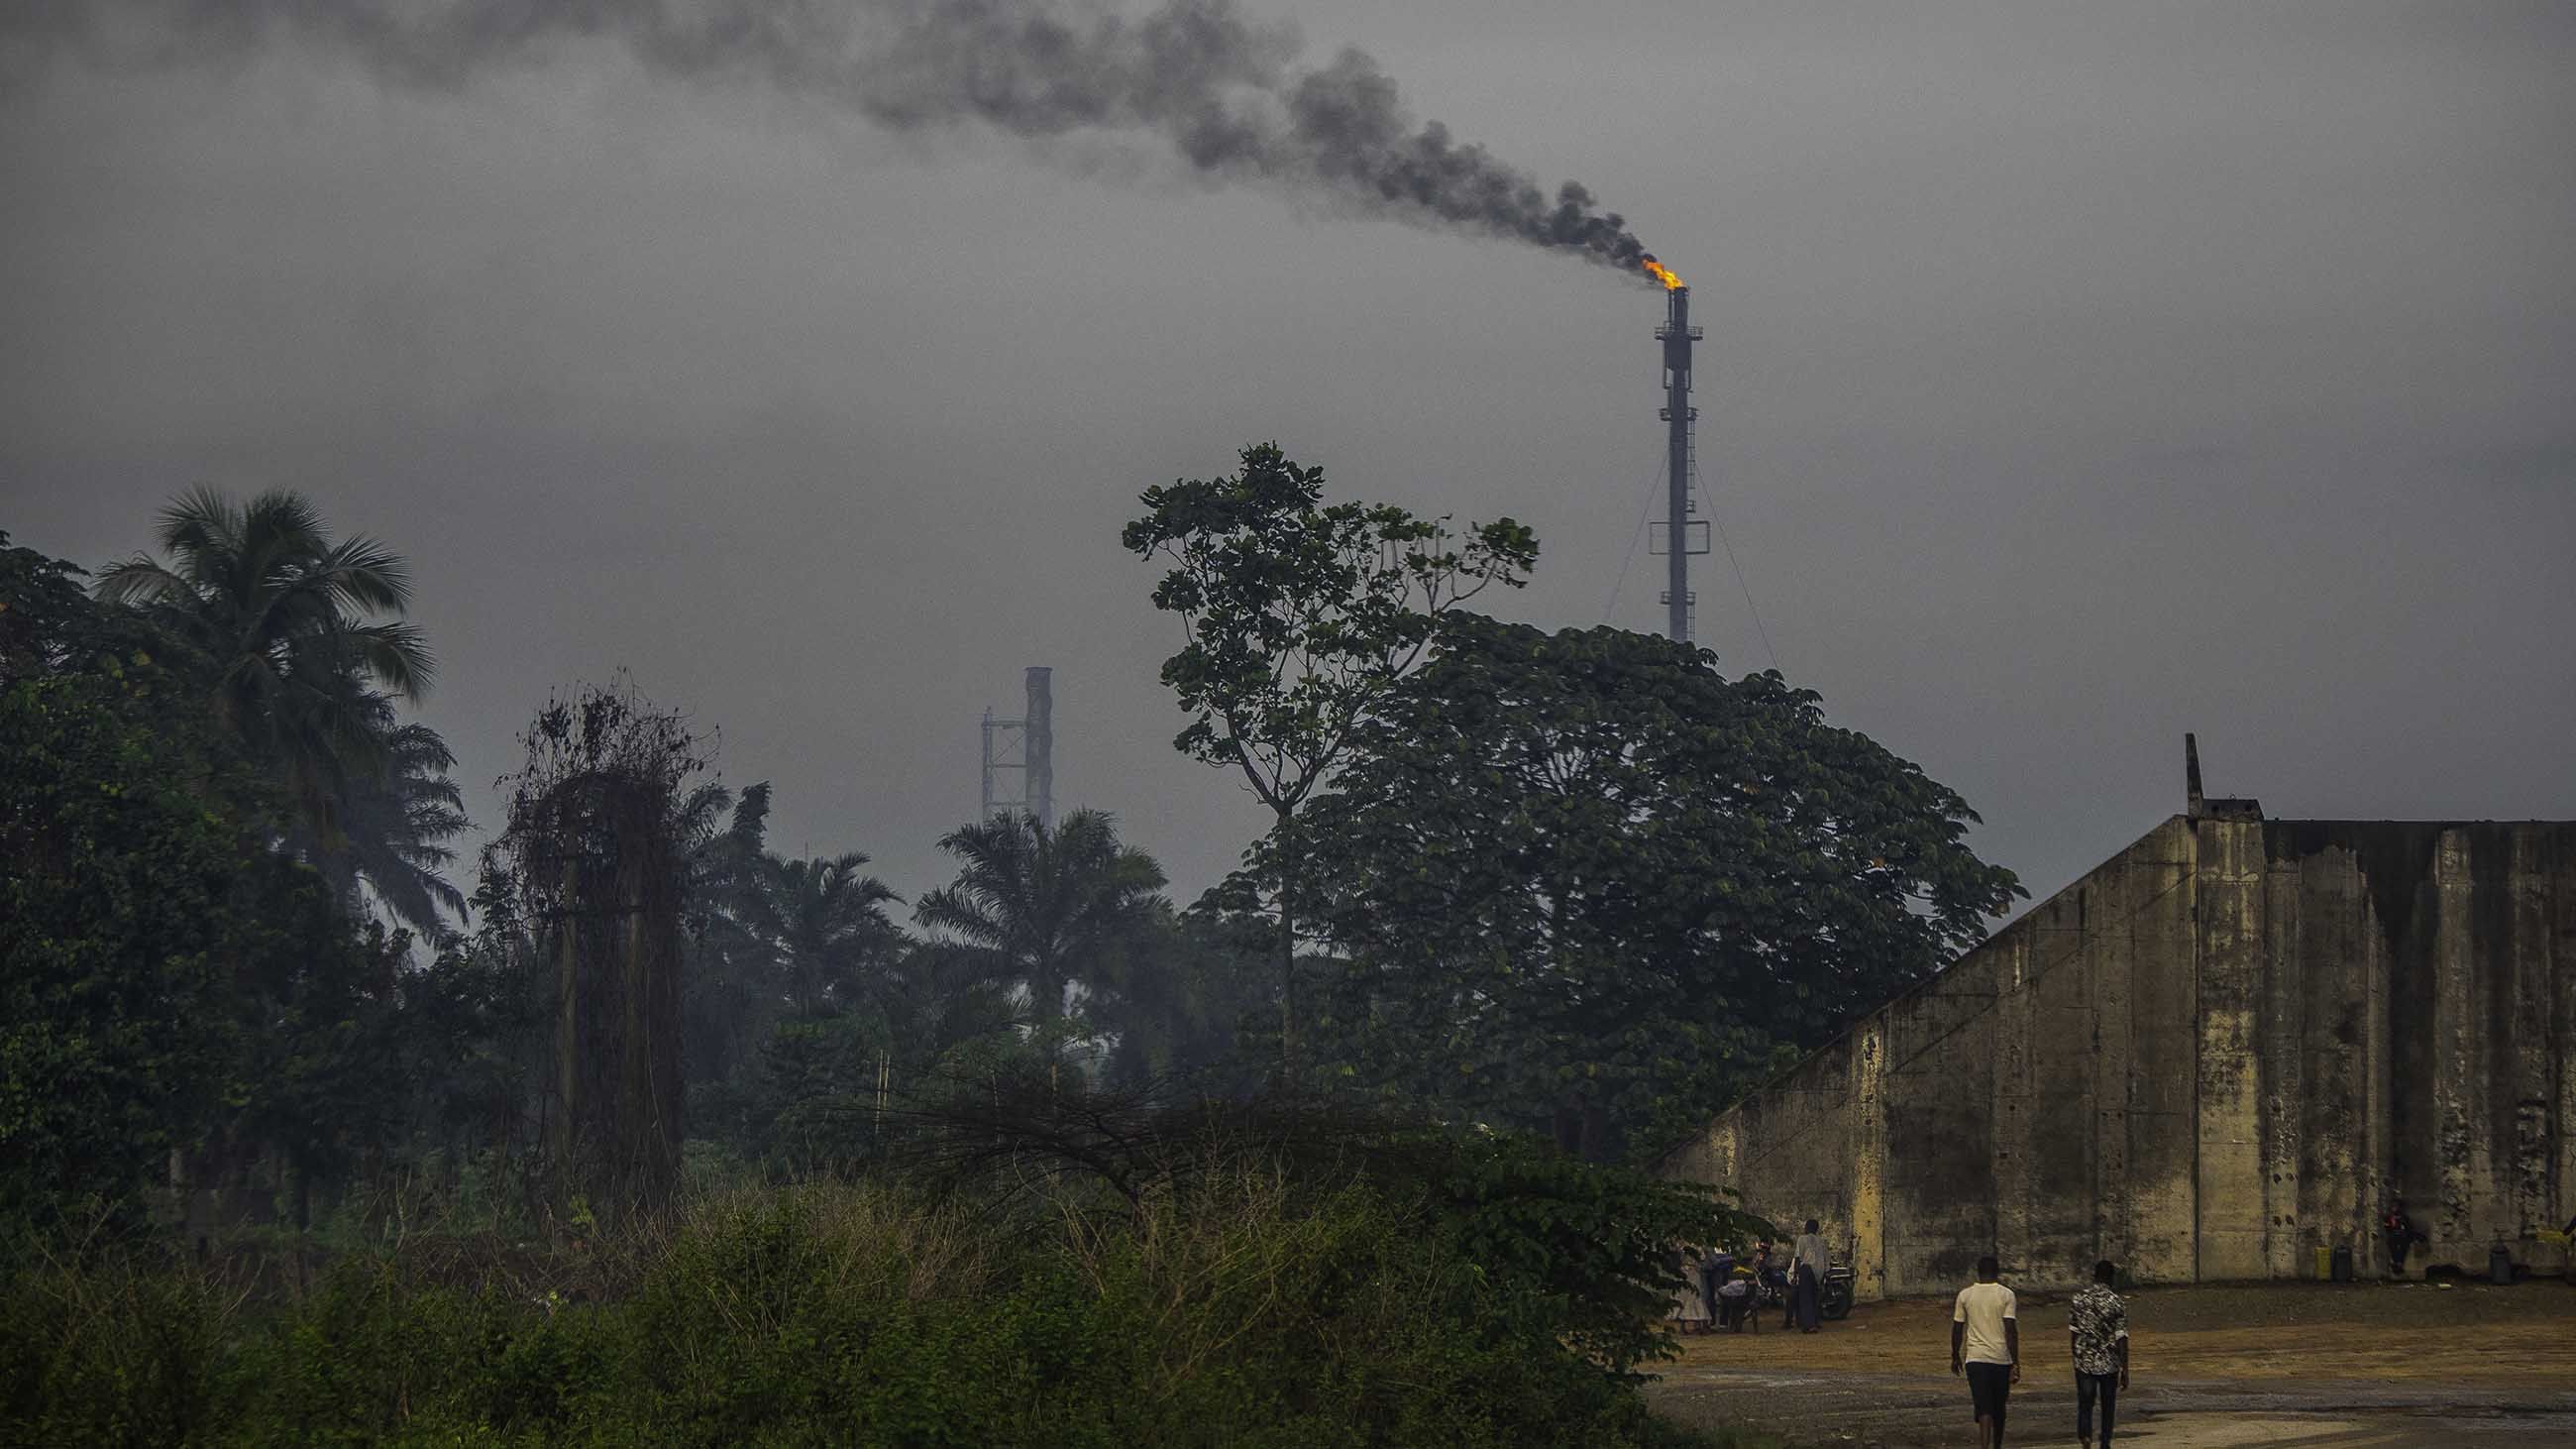 Oil refining of one kind or another casts a constant pall of smog and soot over Port Harcourt. Image by Larry C. Price. Nigeria, 2018.